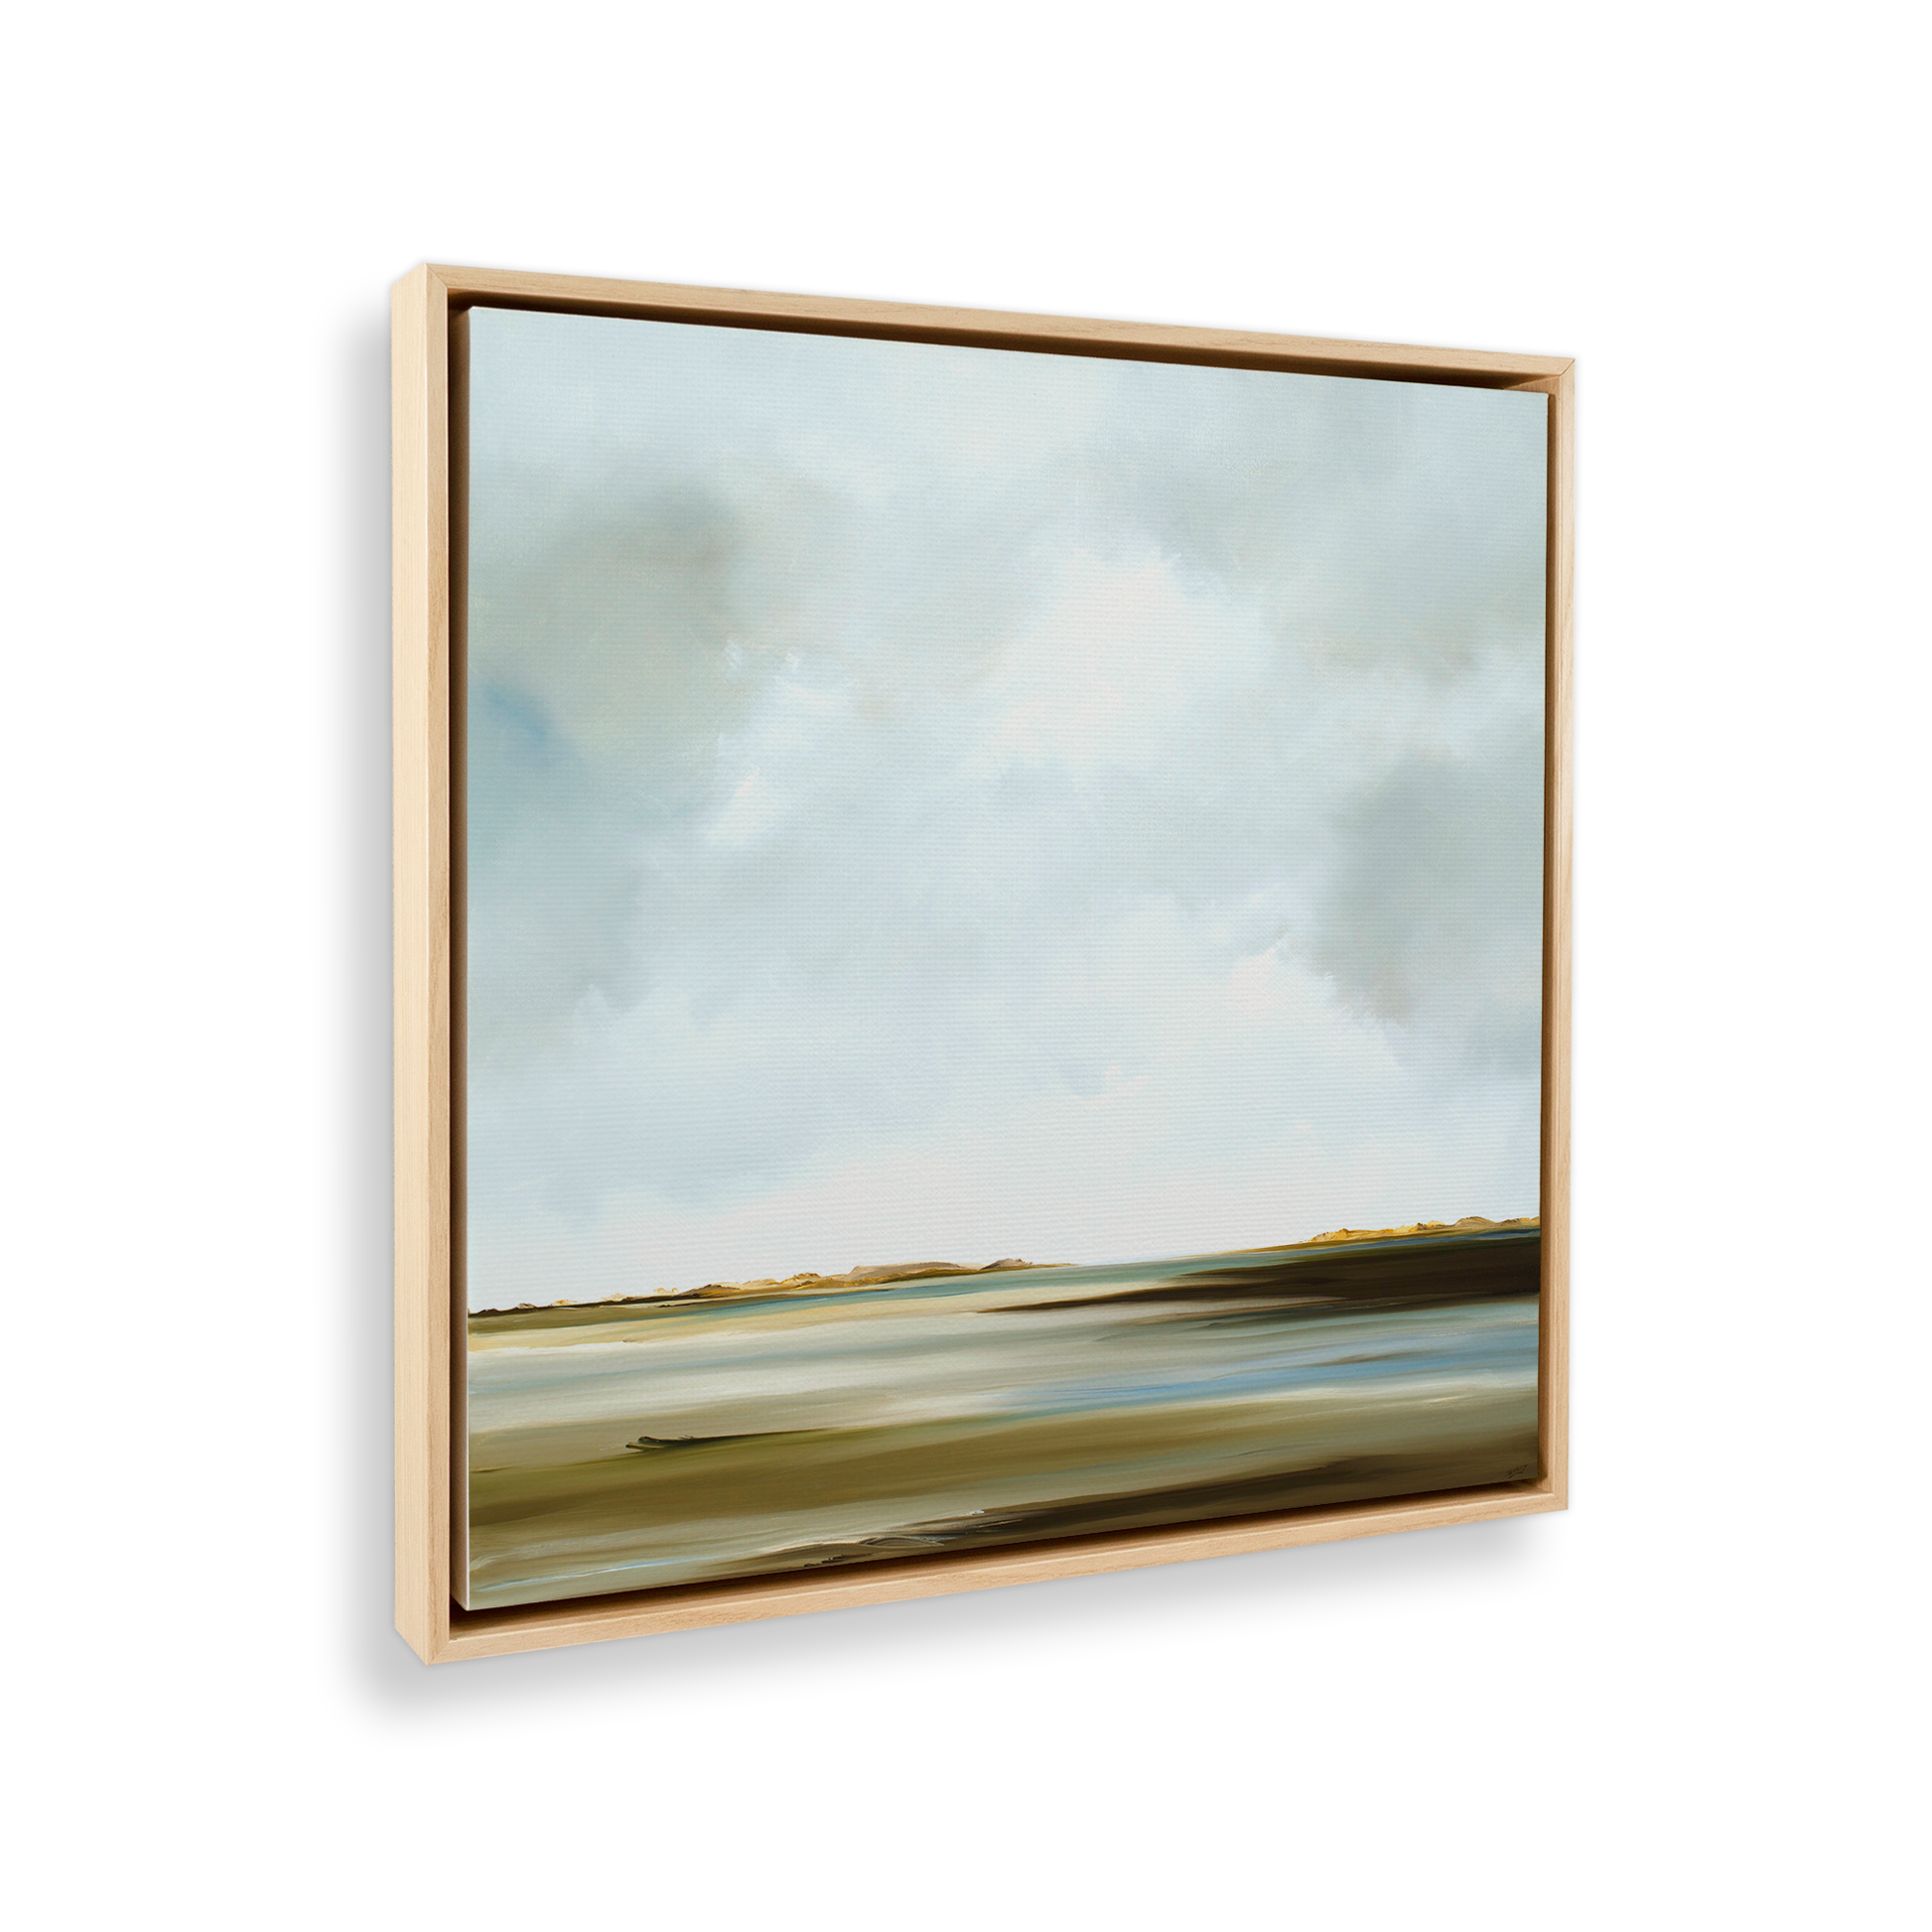 [color:American Maple],[shape:square], Picture of art in a black frame at angle